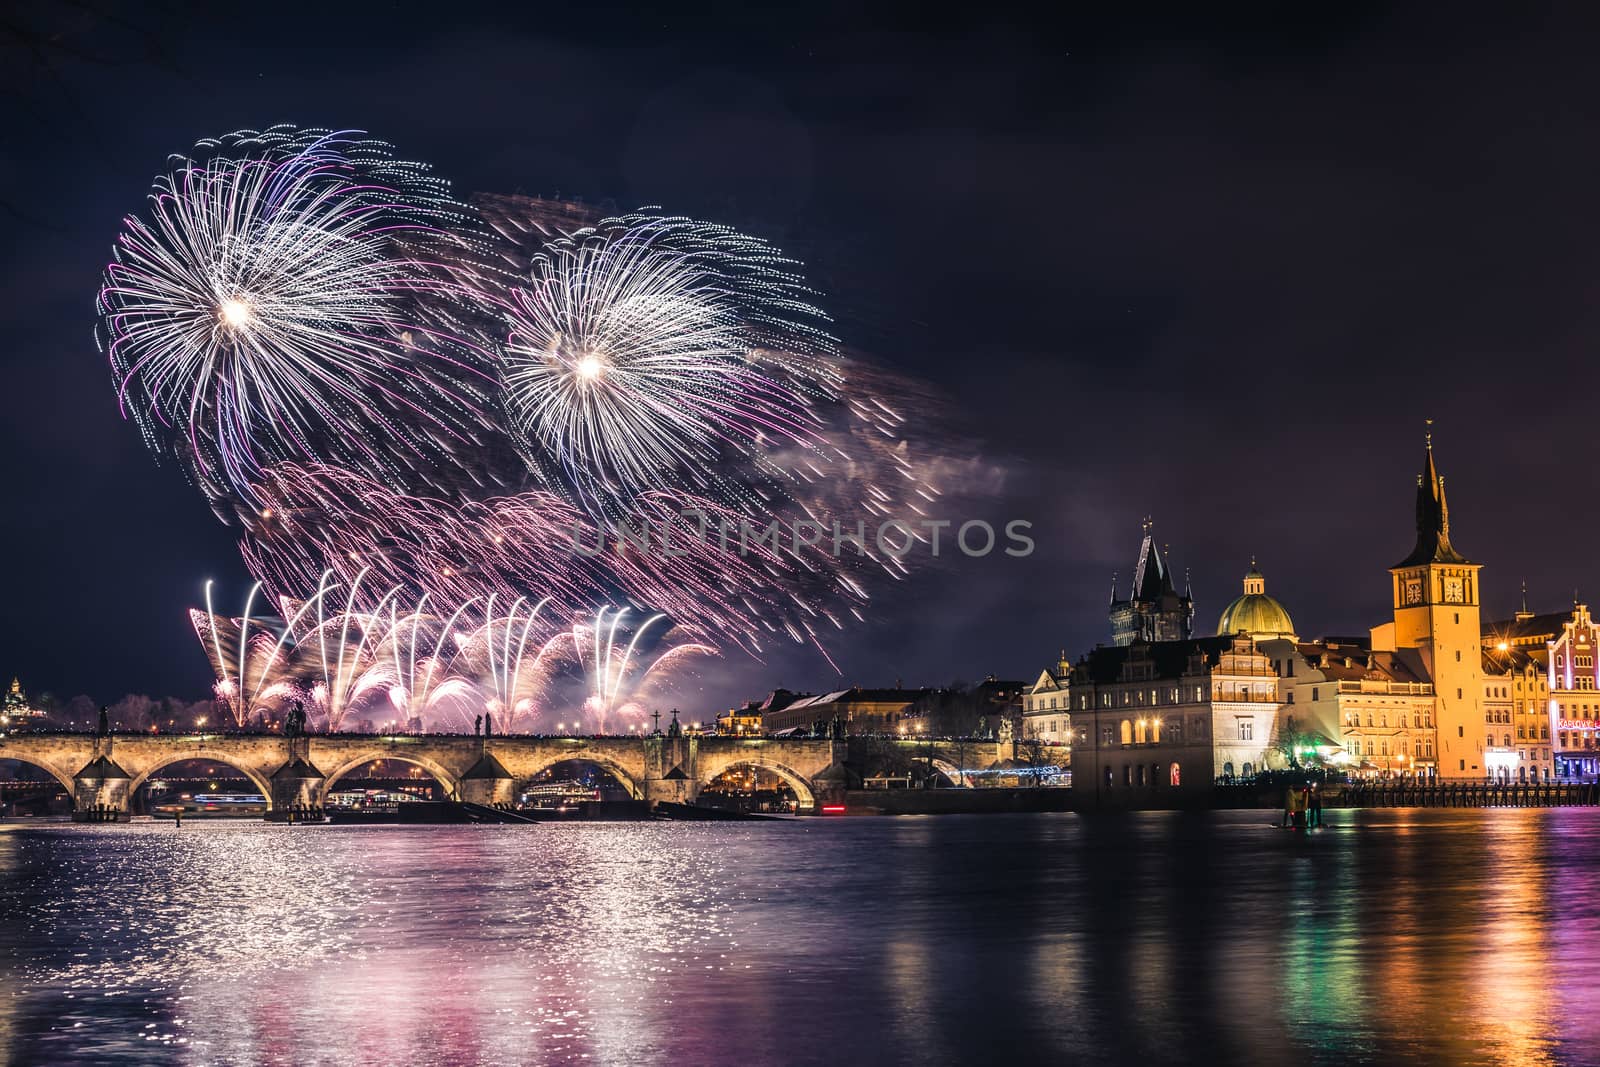 Beautiful fireworks above Charles bridge at night in Prague, historic center, Czech Republic, bautiful reflections in water.